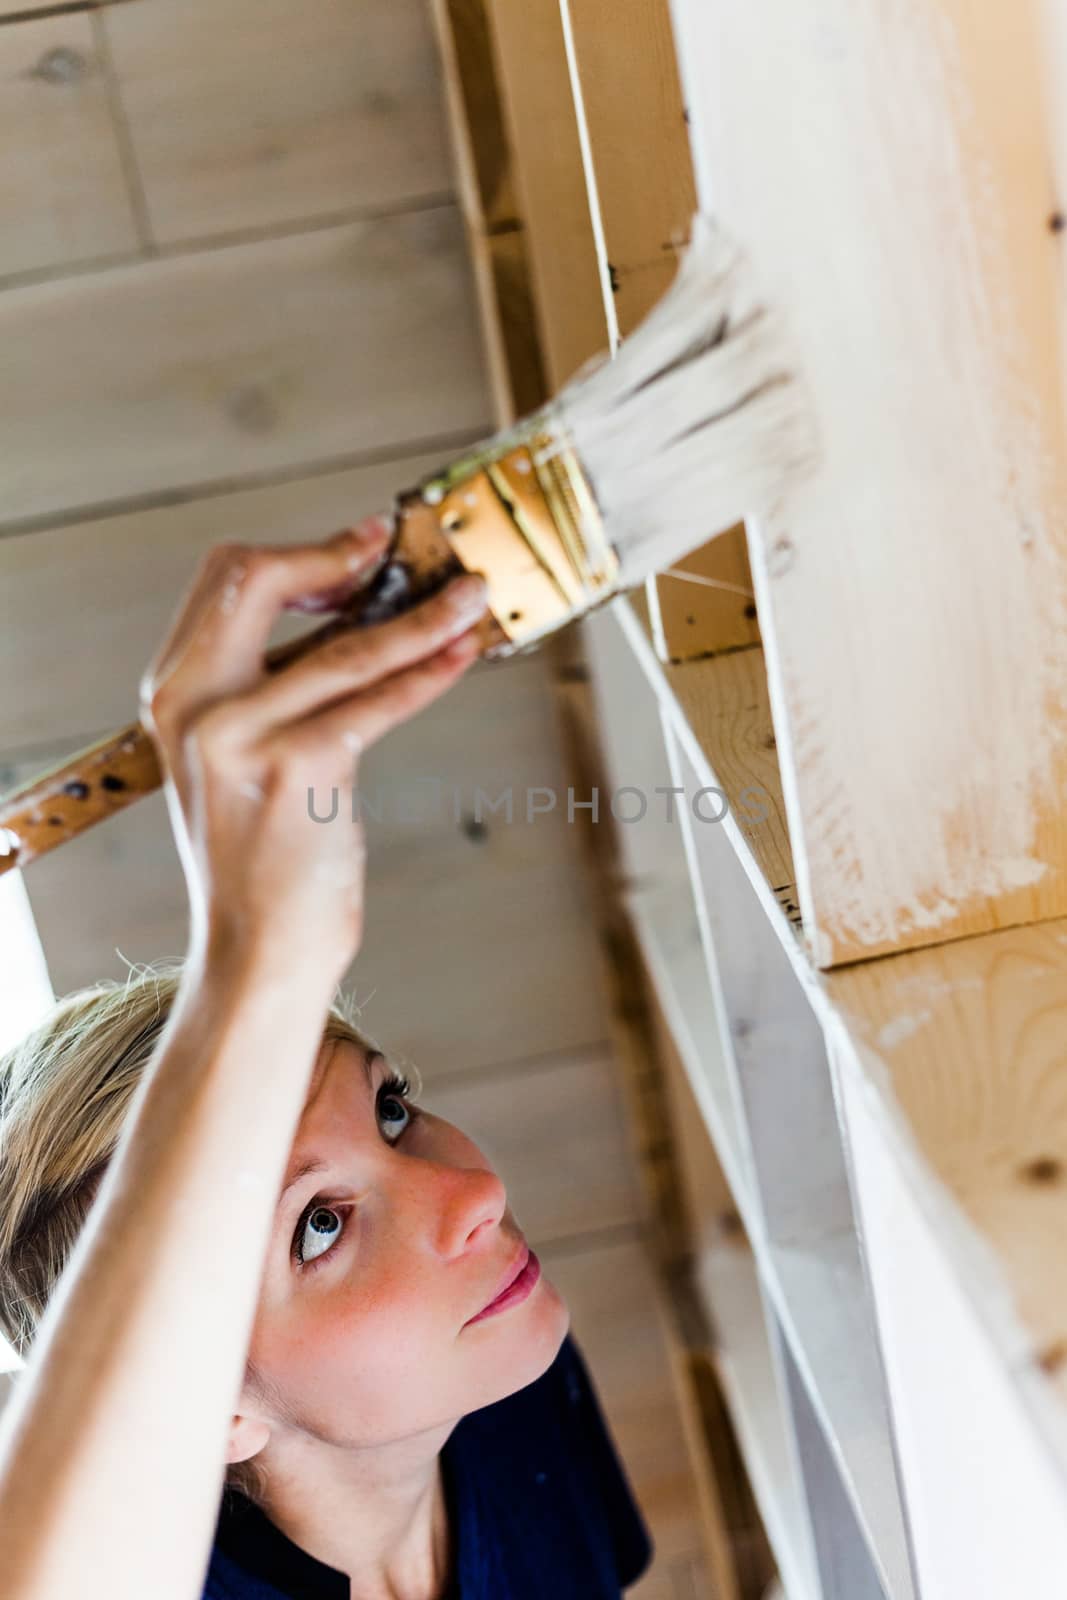 Real Home Renovation (not studio) - Woman Applying White Paint on a Wood Library.